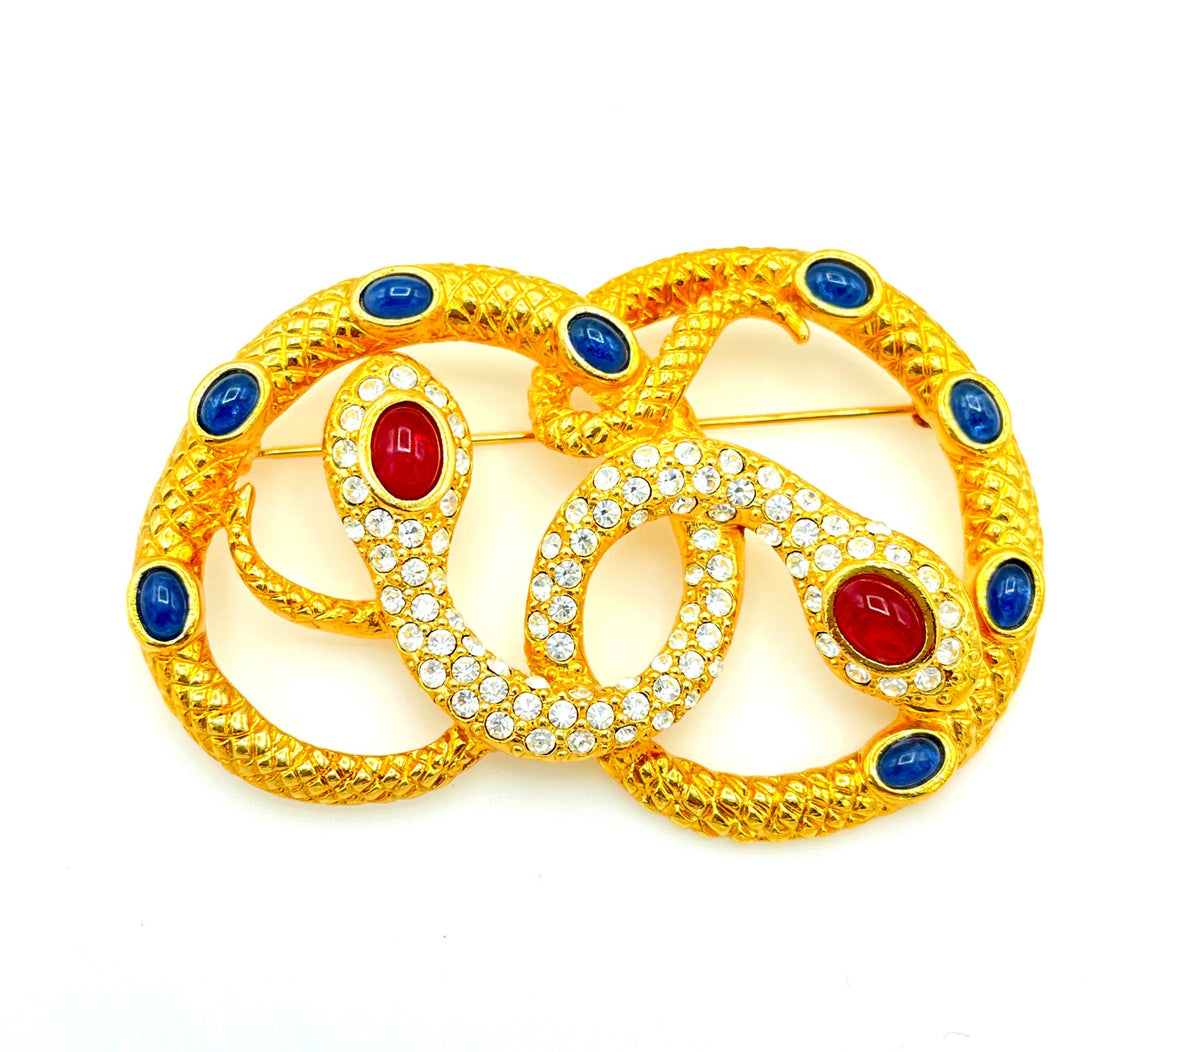 Kenneth Jay Lane Intertwined Snake Brooch - 24 Wishes Vintage Jewelry